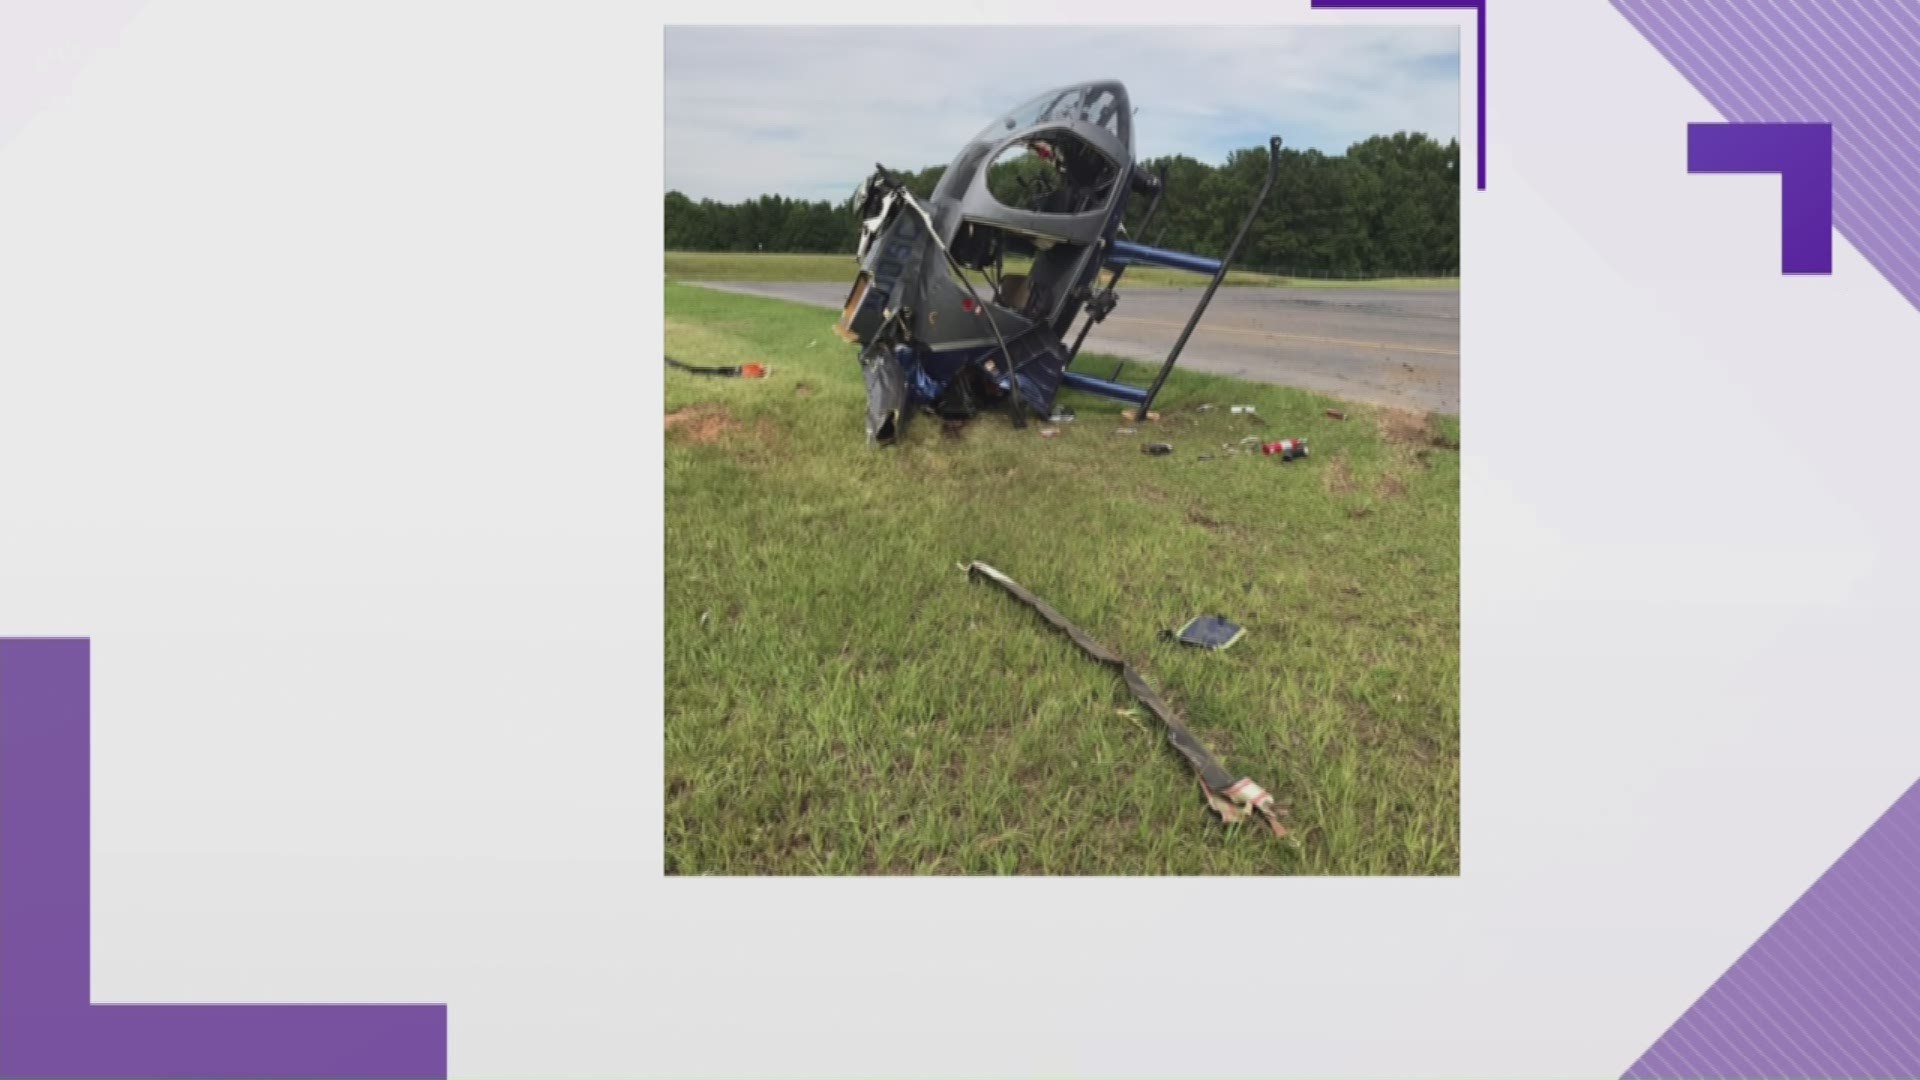 The helicopter crashed at the Summerville airport, the pilot was the only one on board and was taken to the hospital for non-life threatening injuries.